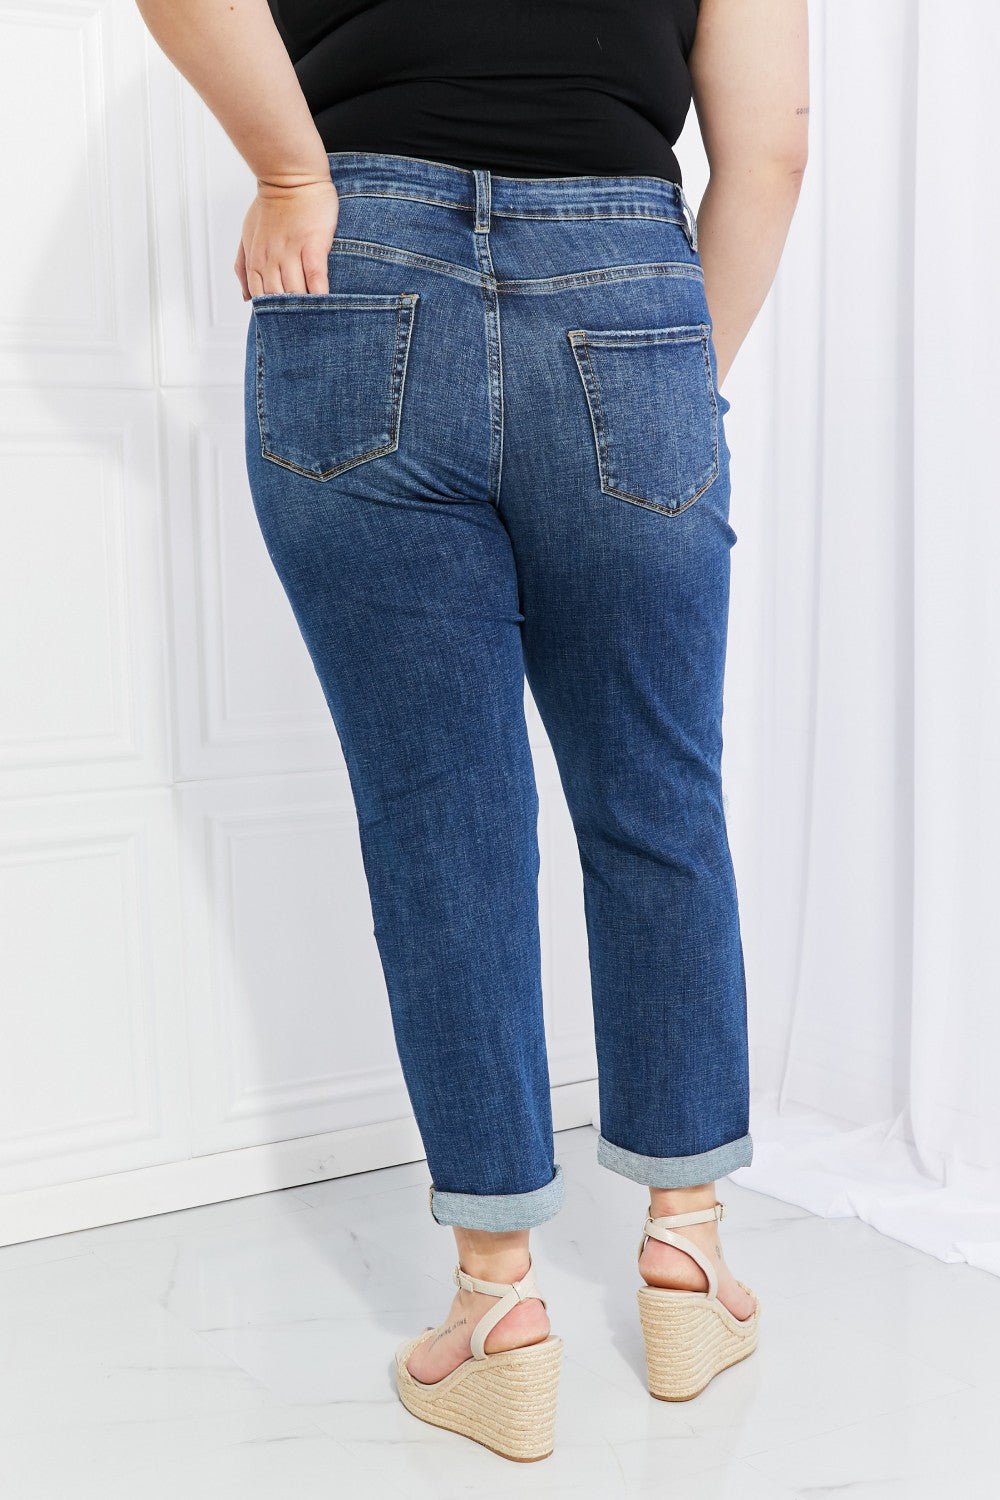 VERVET Full Size Distressed Cropped Jeans with Pockets - Kinsley & Harlow